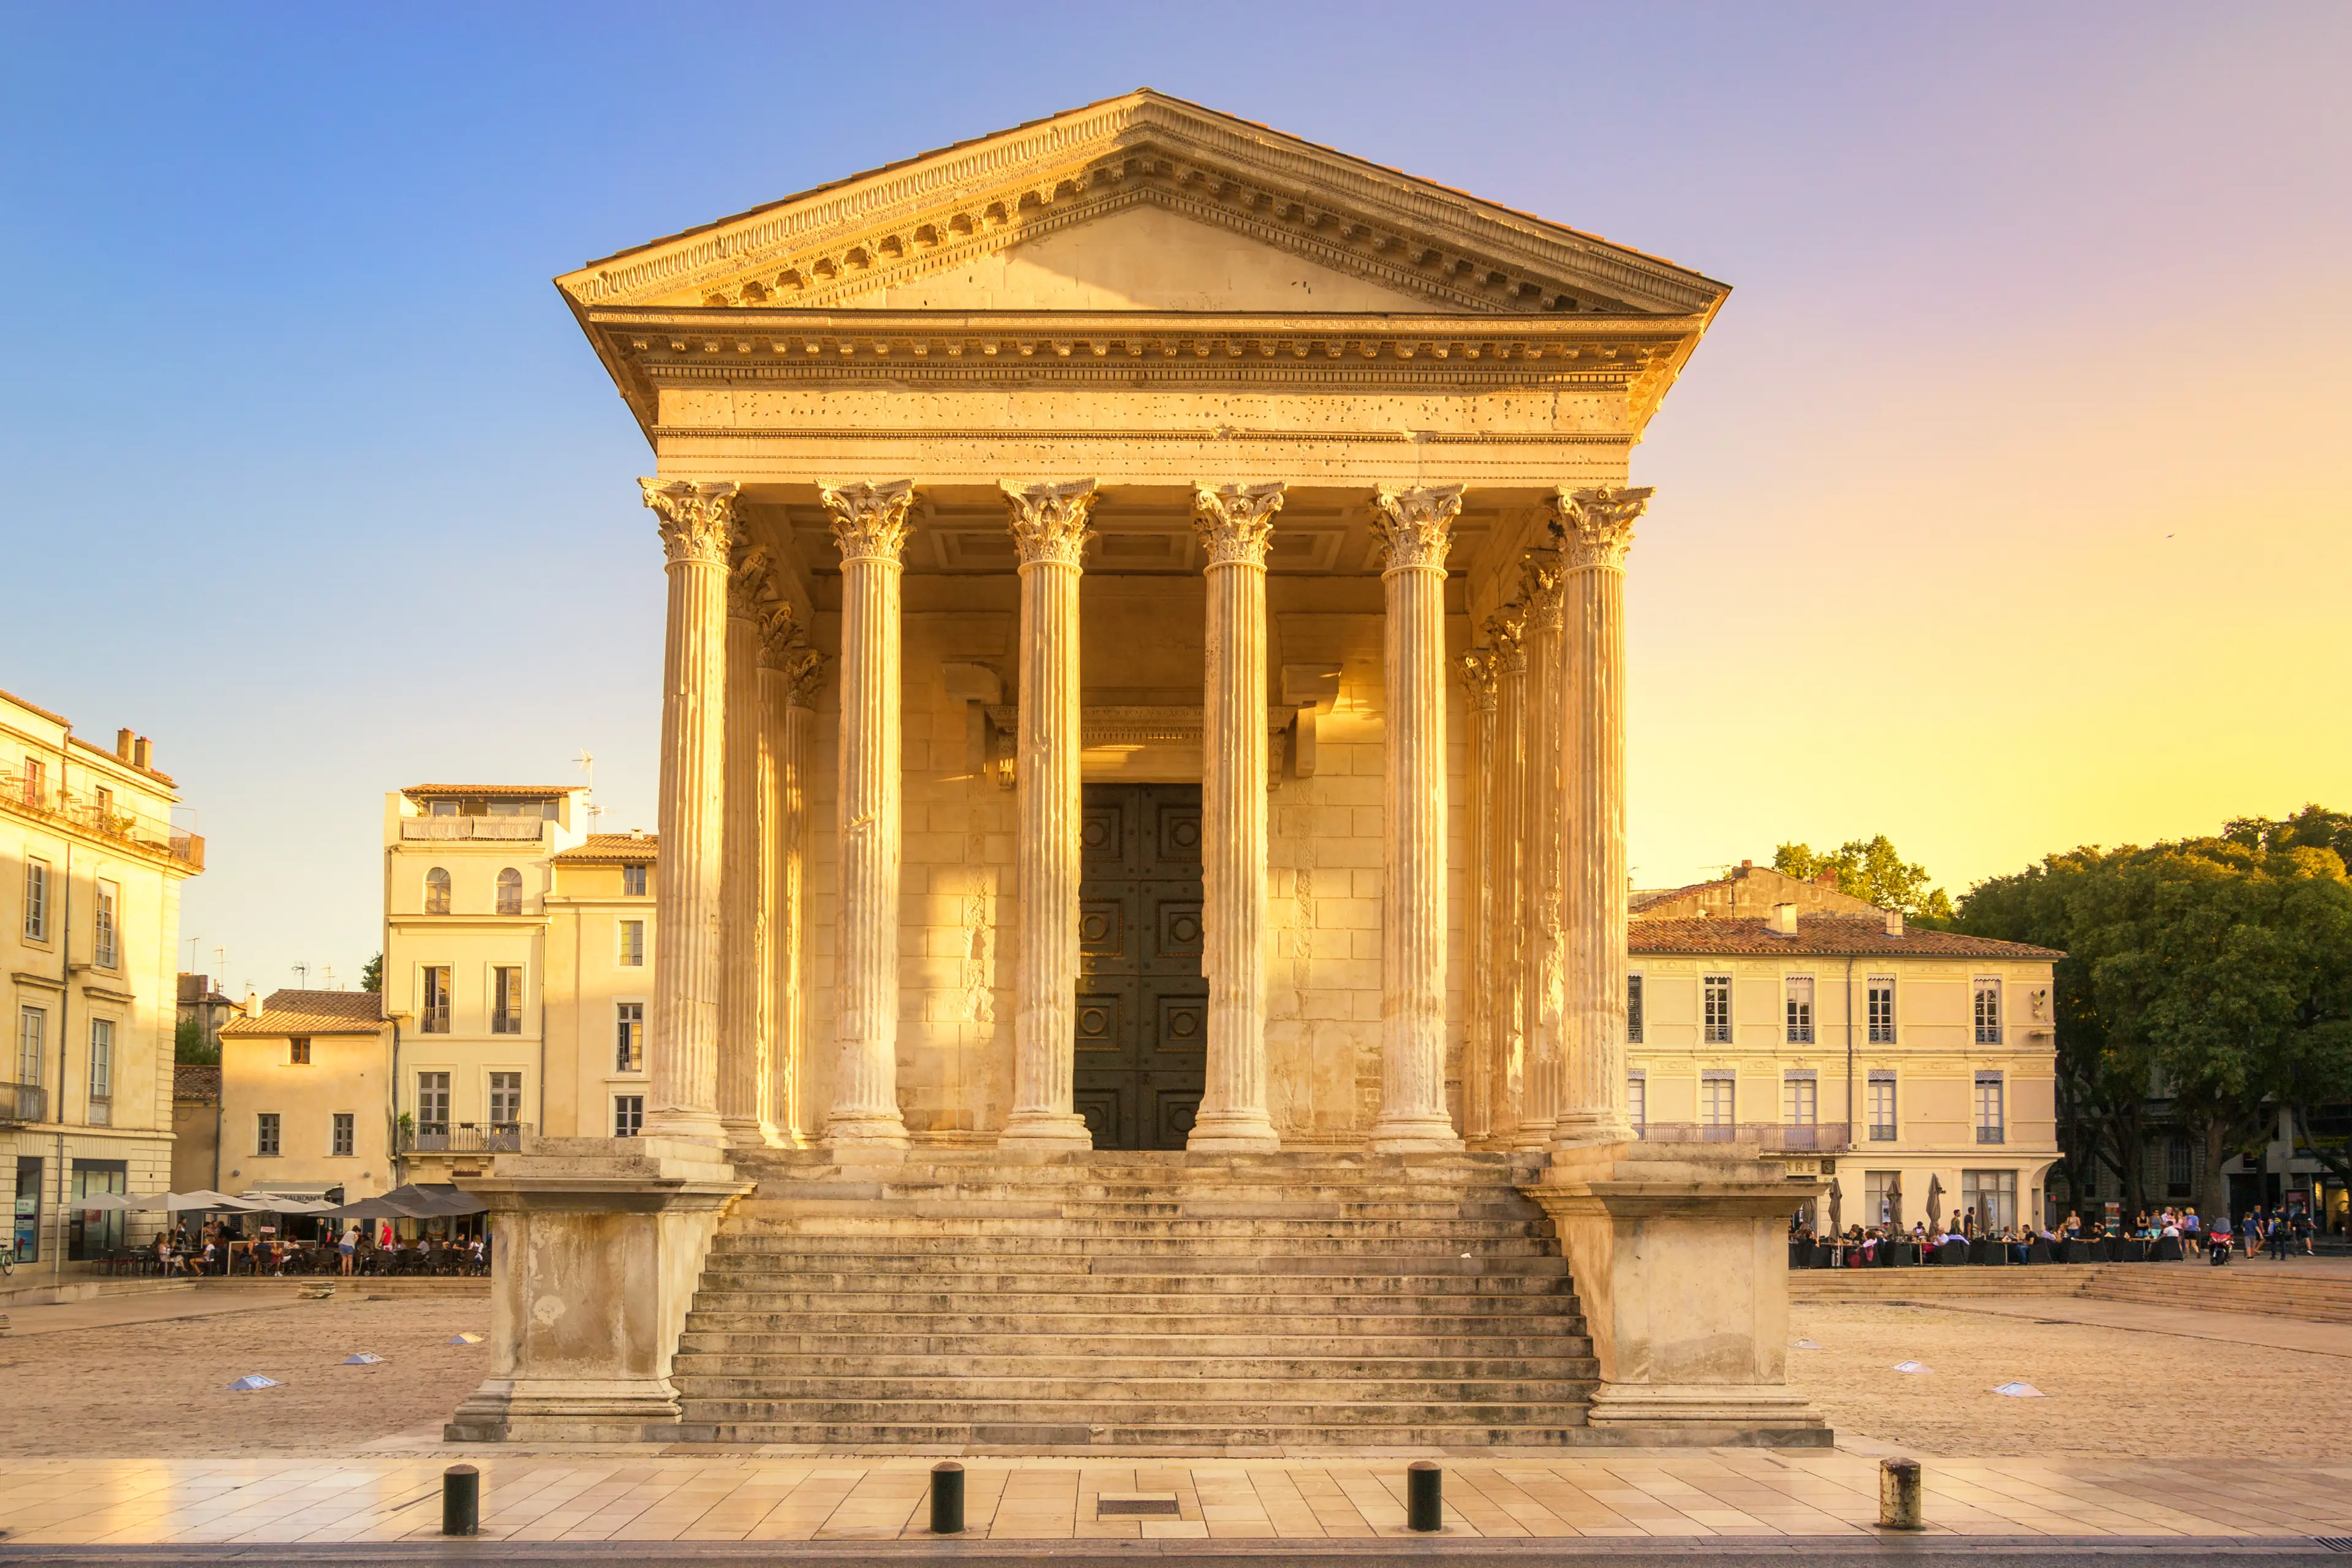 3-Day Local Sightseeing & Shopping Adventure in Nimes with Friends